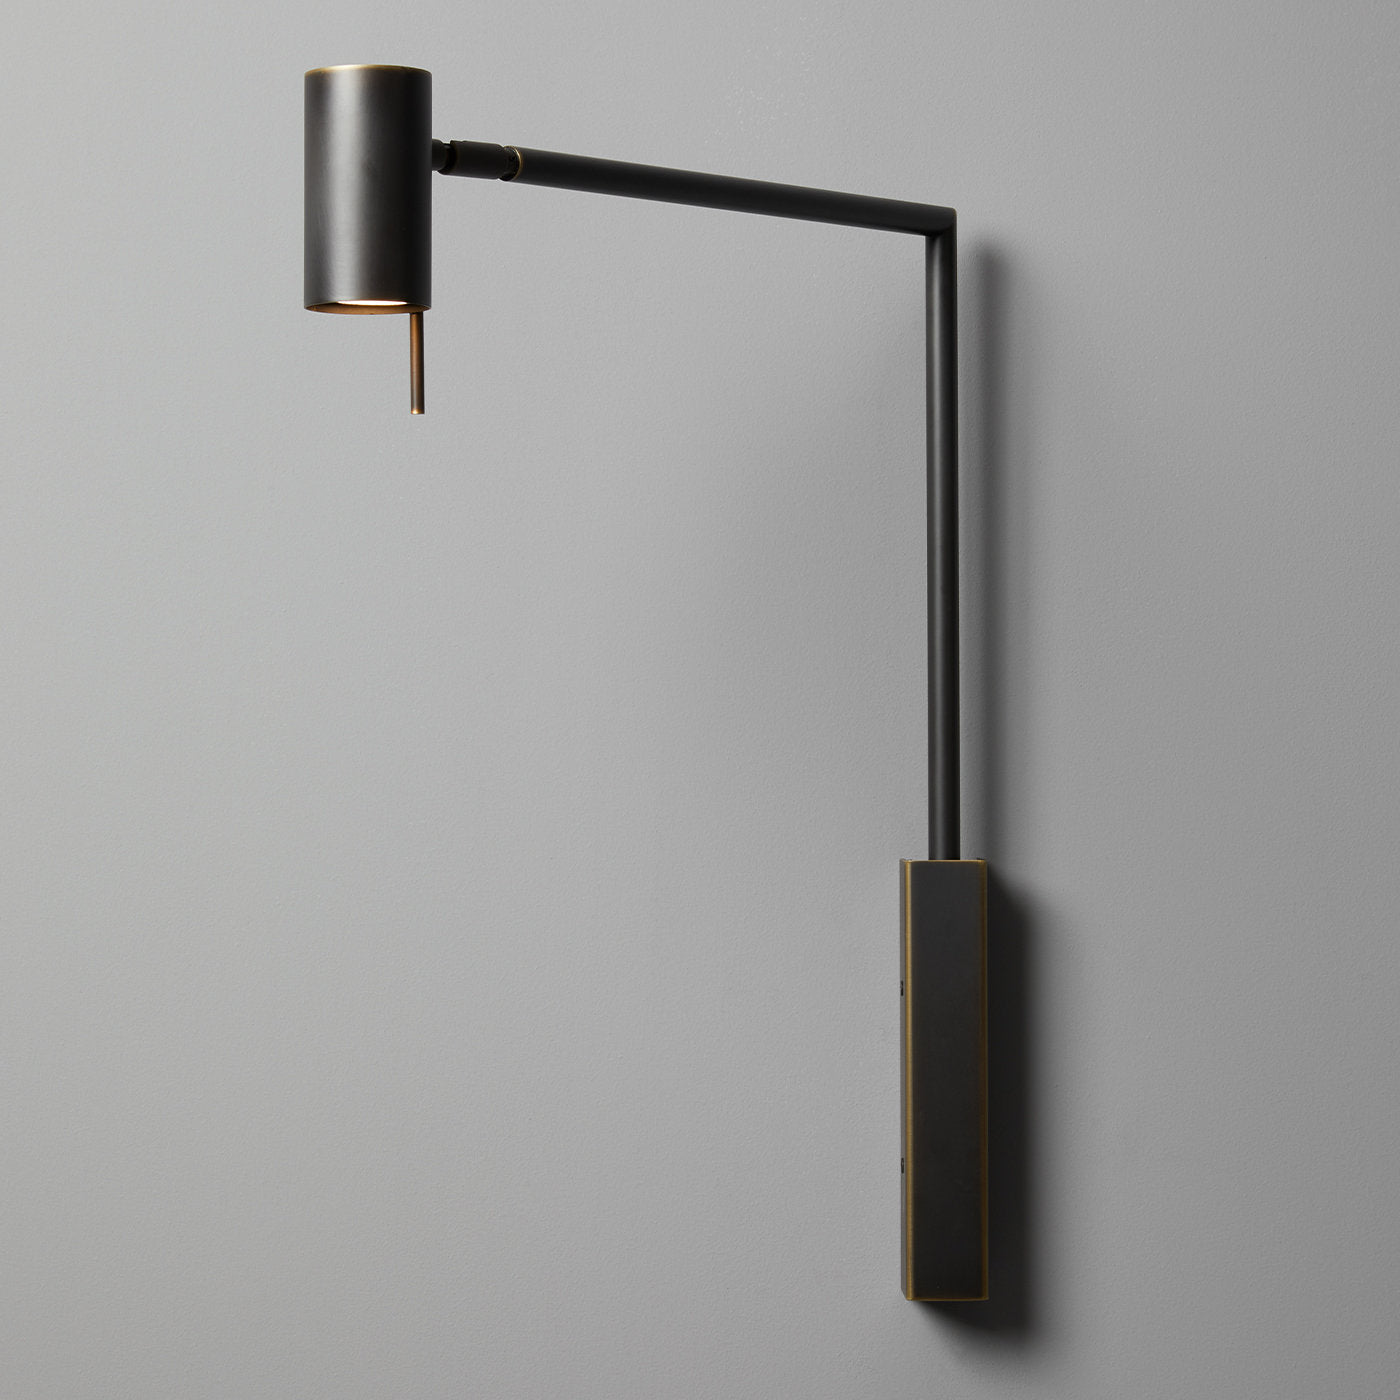 Rectus Wall Lamp with Adjustable Arm - Alternative view 1